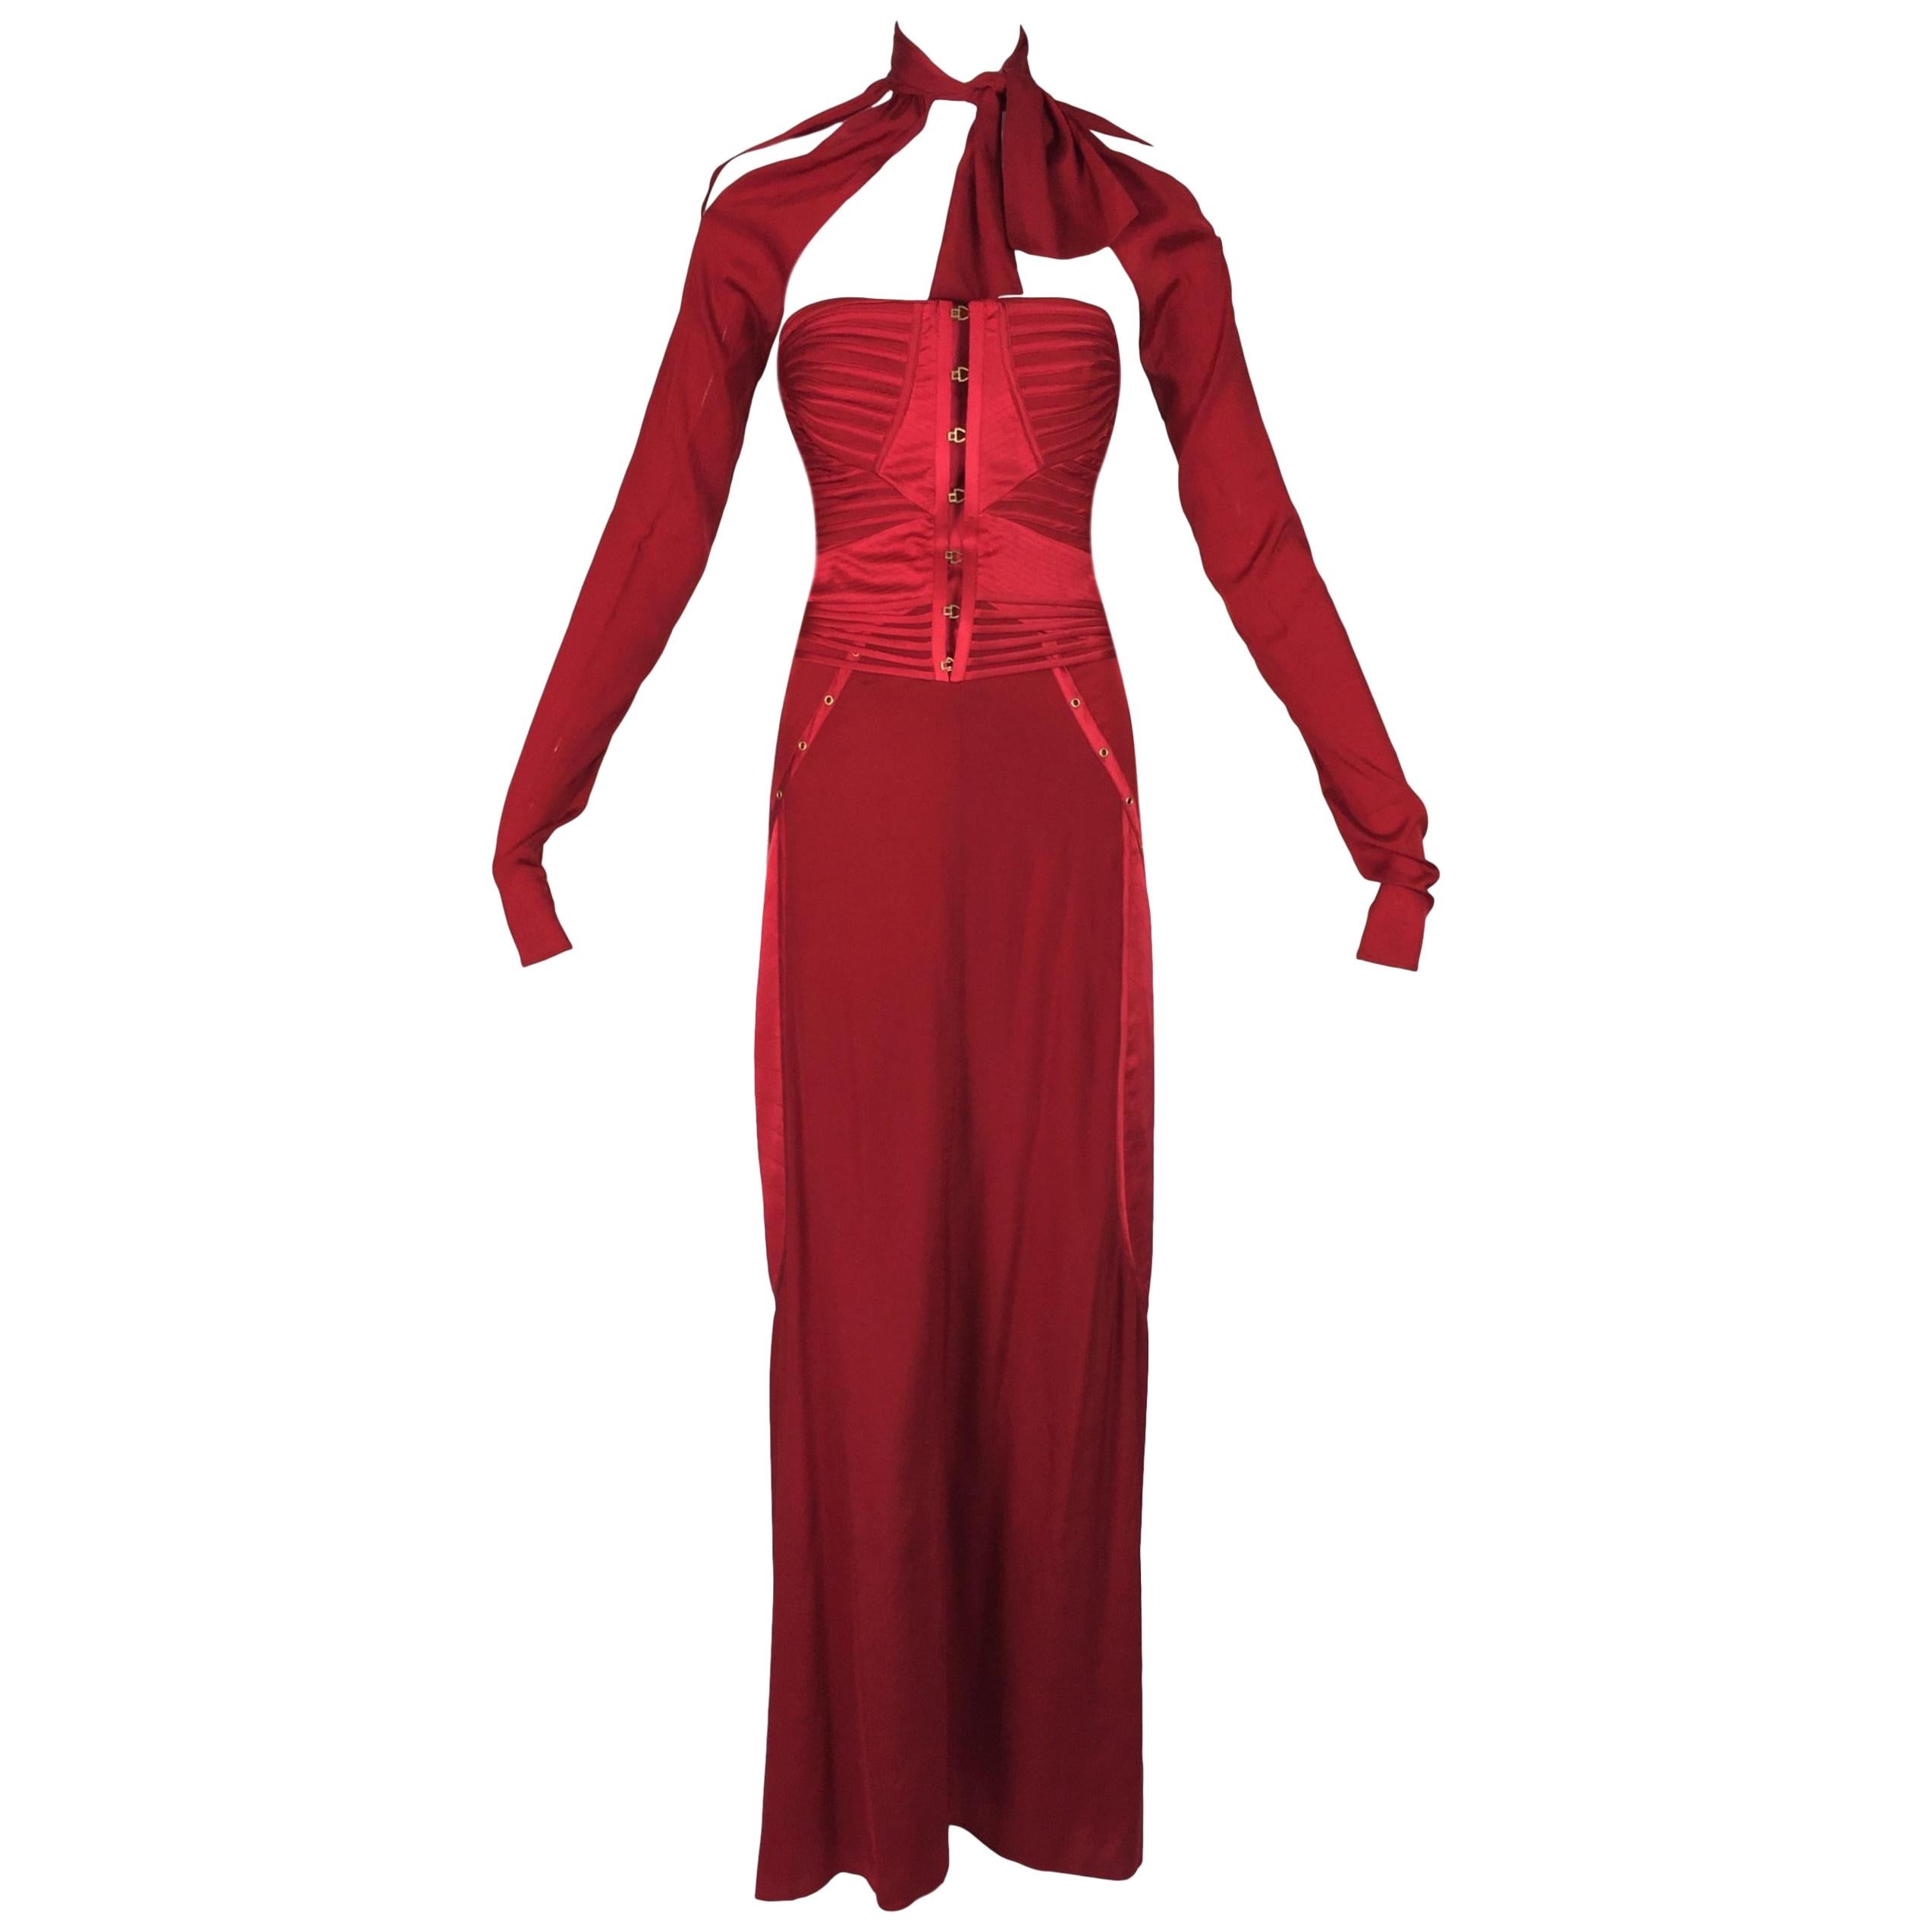 F/W 2003 Gucci by Tom Ford Runway Red Strapless Corset Gown Dress